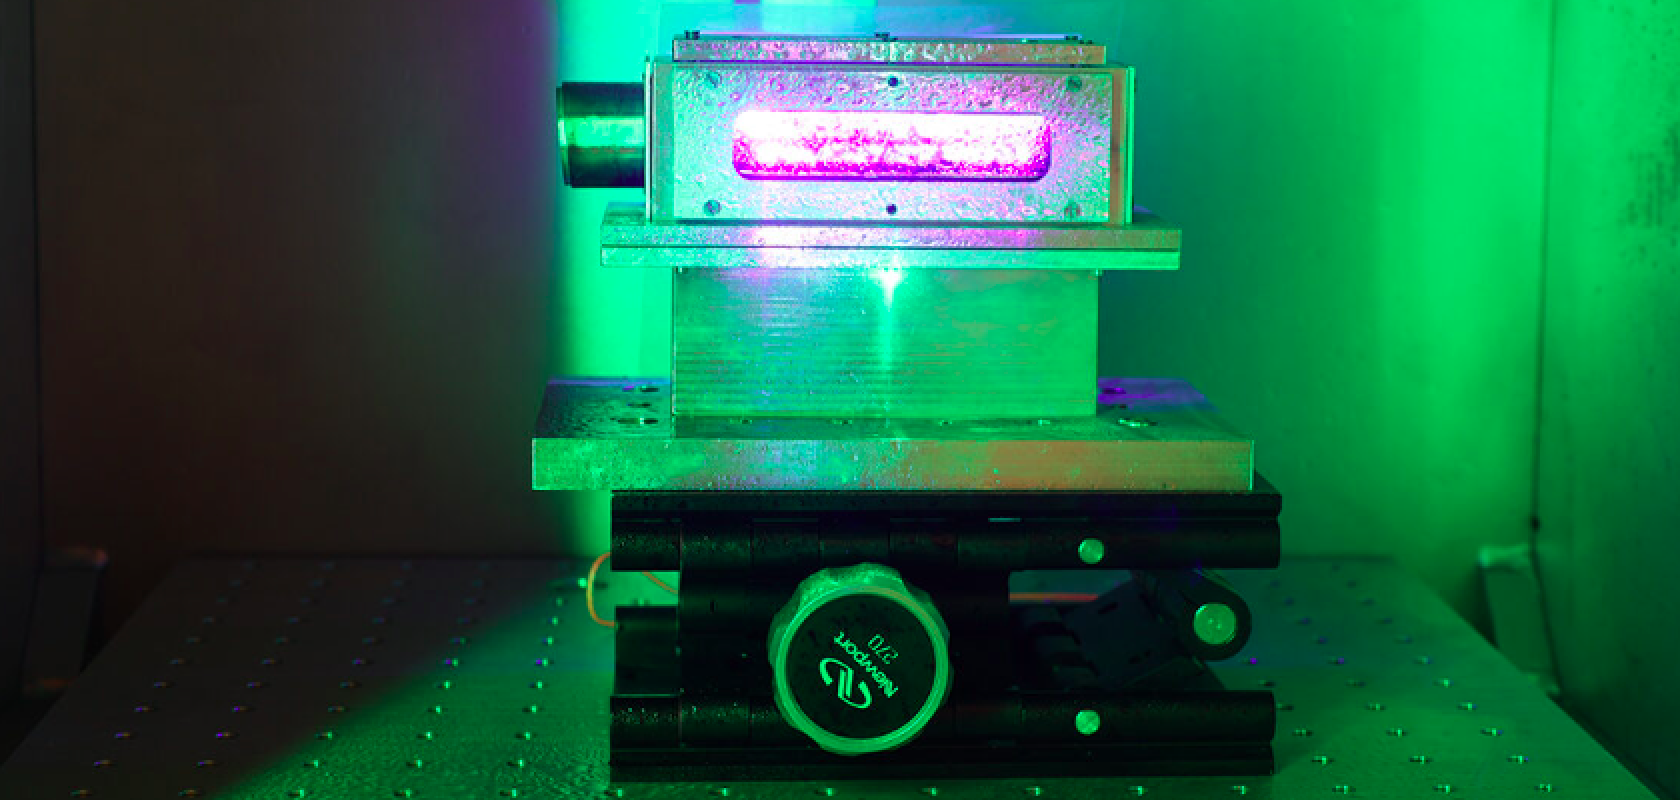 This gas cell is a key component of a 'compact wakefield laser accelerator' developed at The University of Texas (Image: UT News)